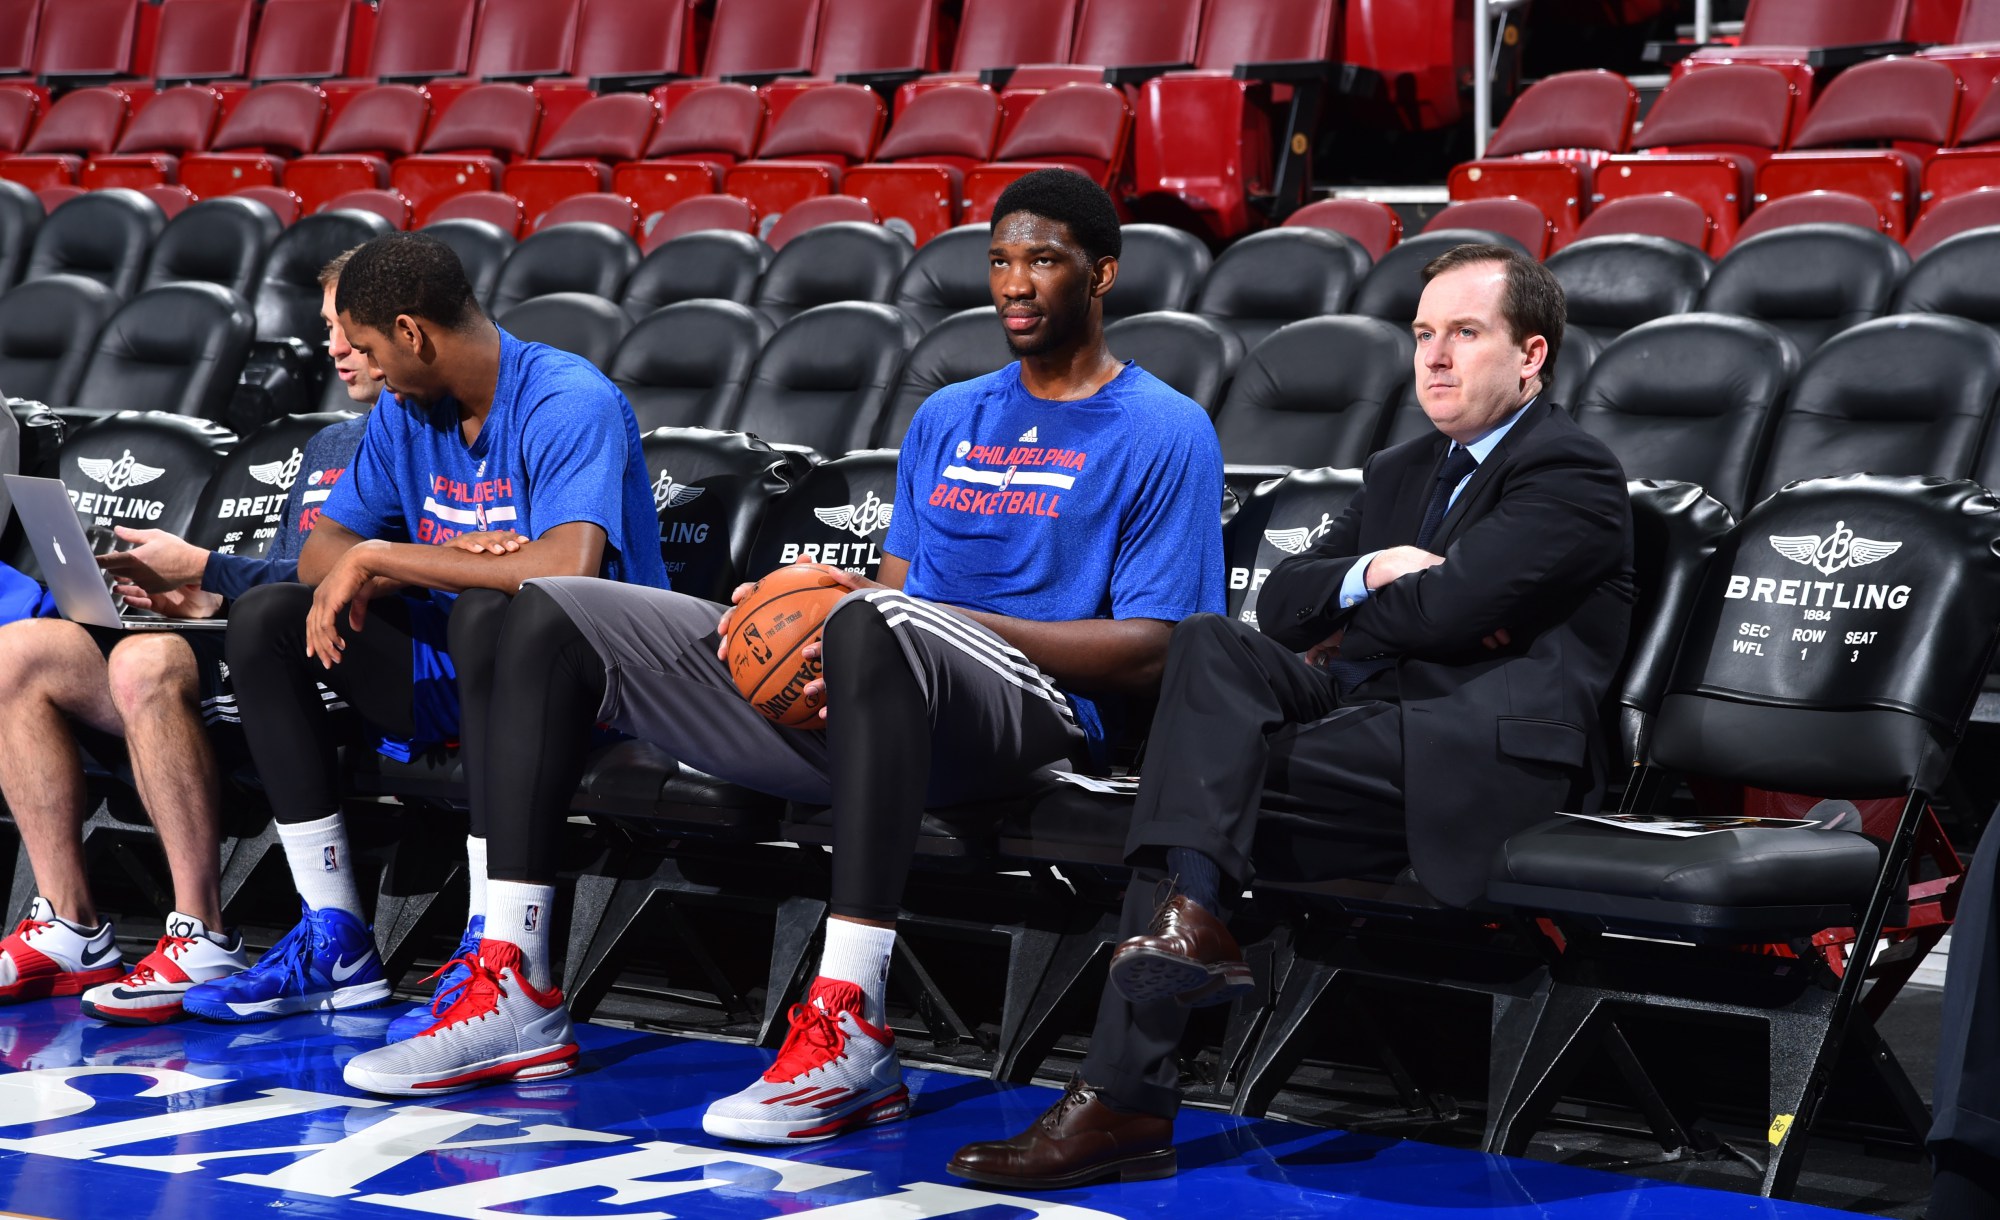 Sam Hinkie Writes A 13-Page “Victim” Letter On The Way Out